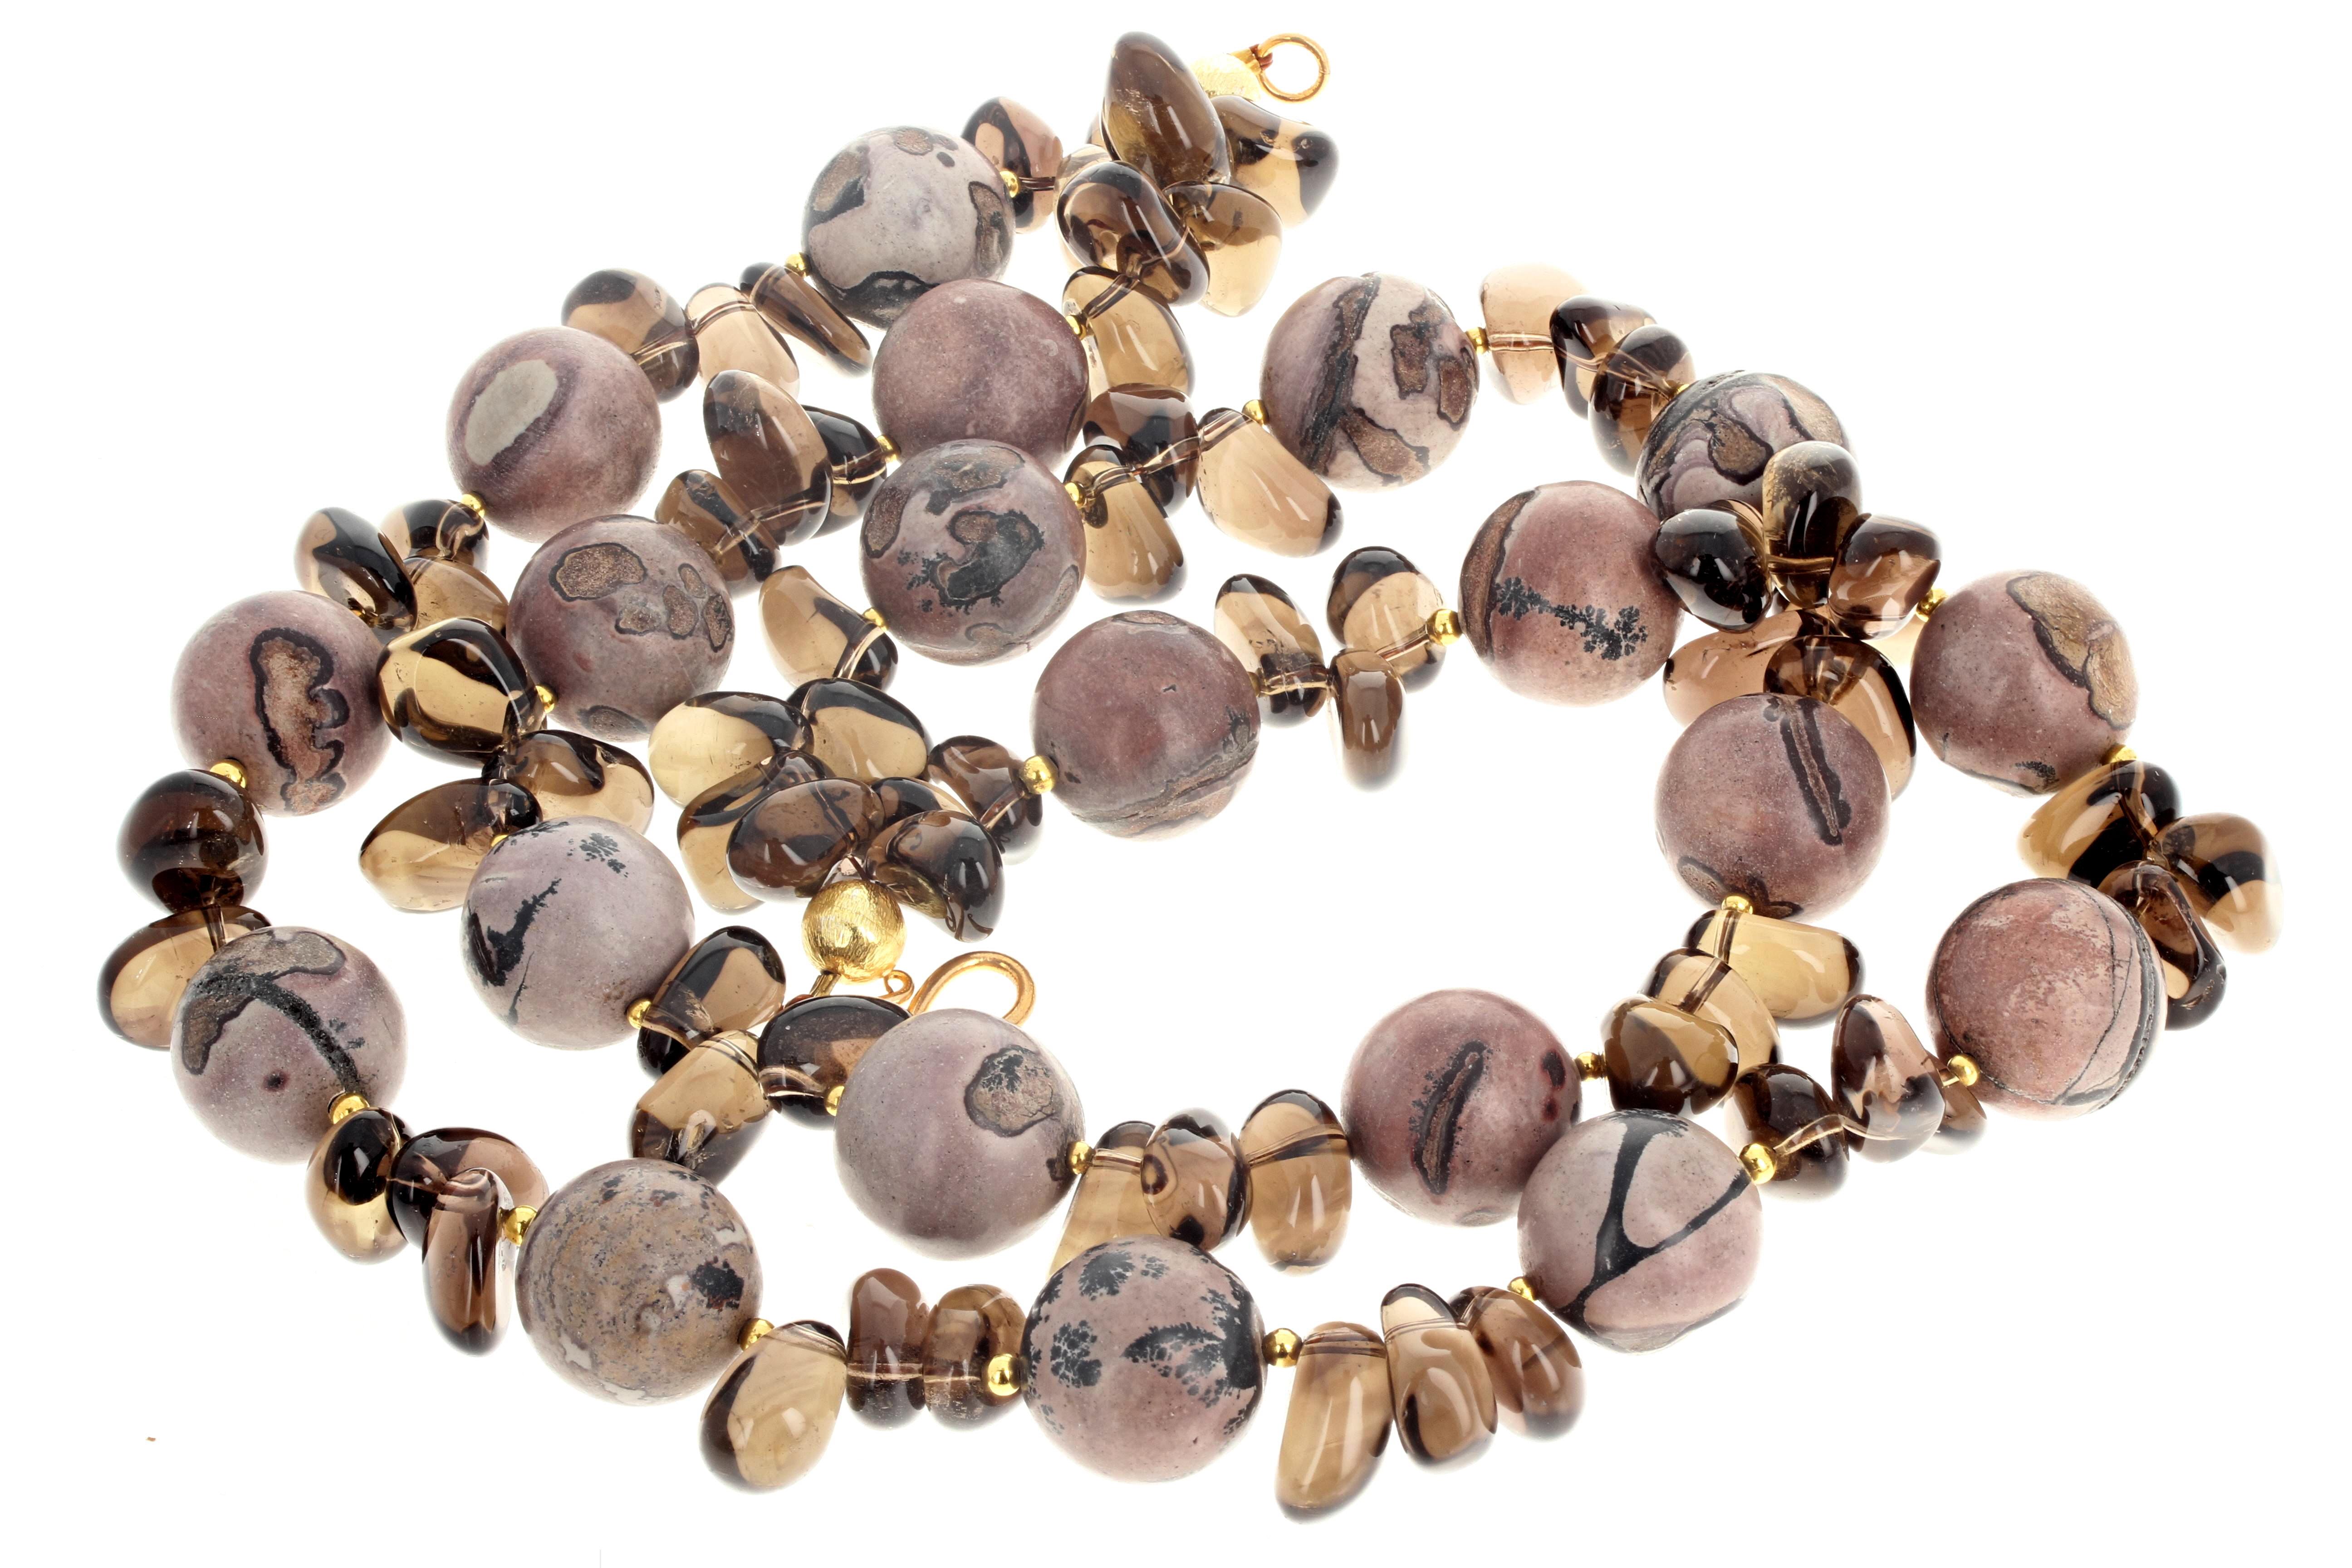 This magnificent double strand of natural highly polished dramatic slightly pinky toned Jasper enhanced with natural real highly polished Smoky Quartz is 17 inches long.  The round polished Jaspers are approximately 18mm and the polished Smoky